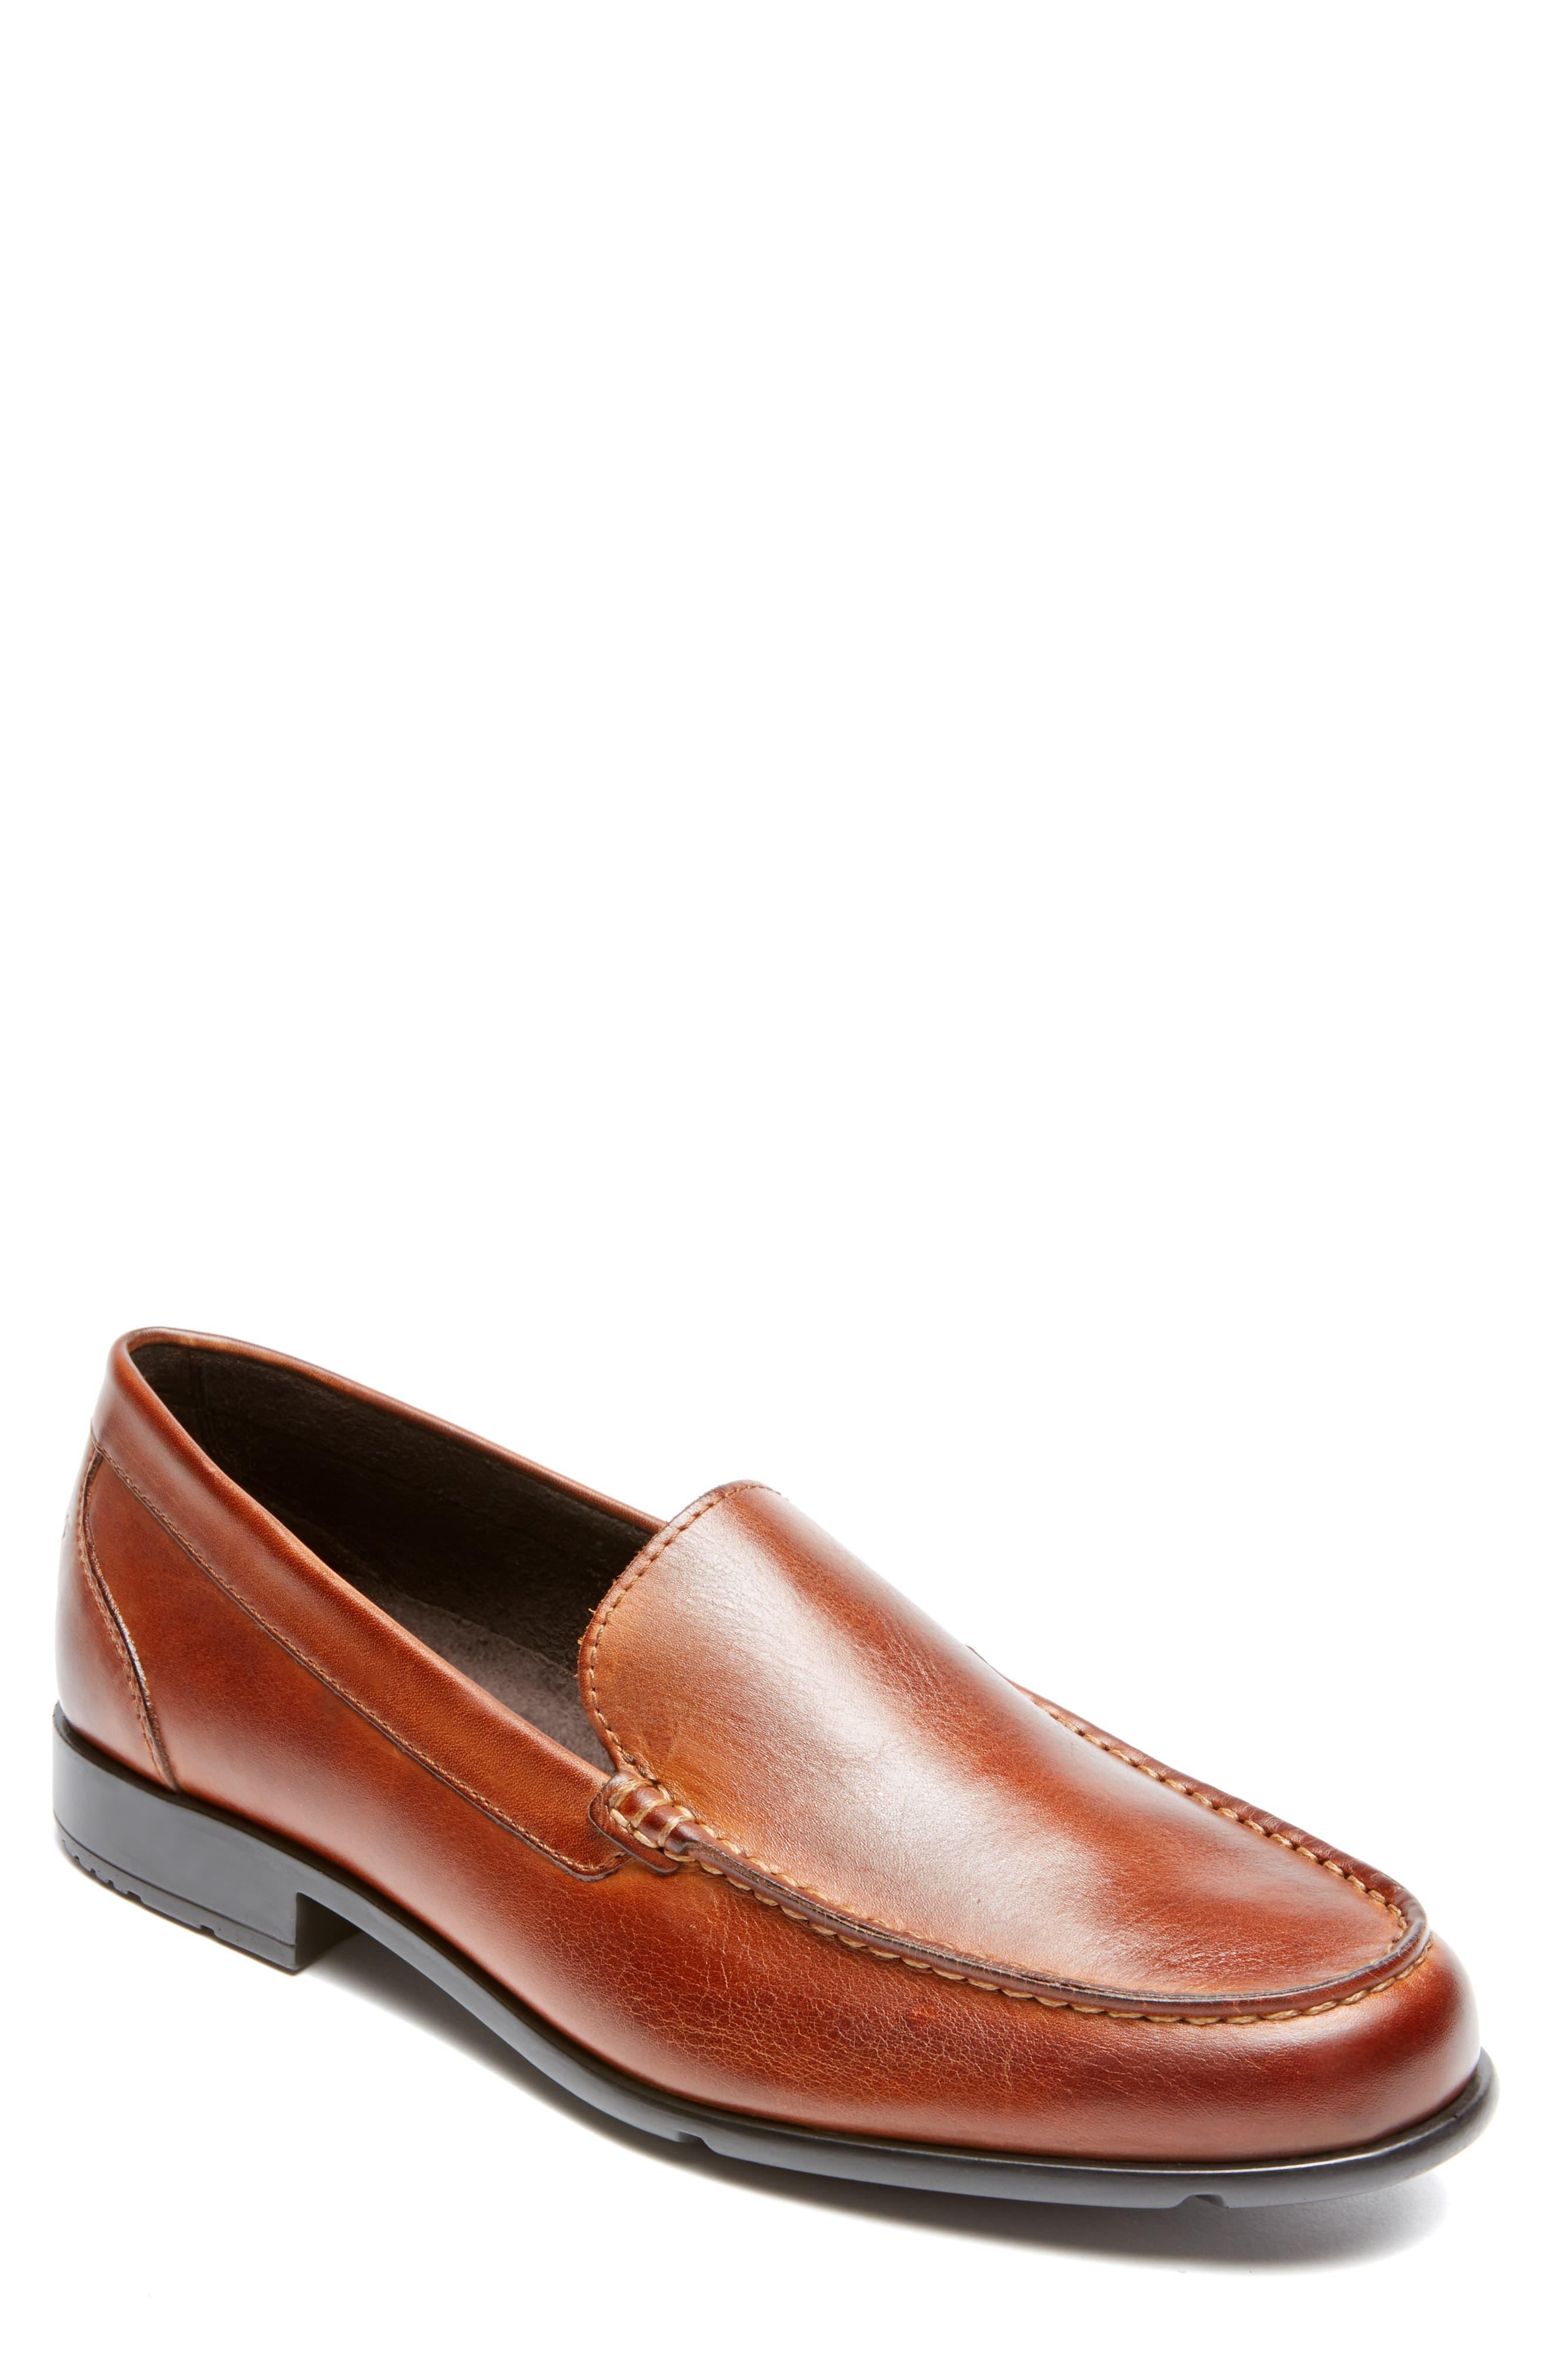 Rockport Leather Classic Venetian Loafer in Cognac (Brown) for Men ...